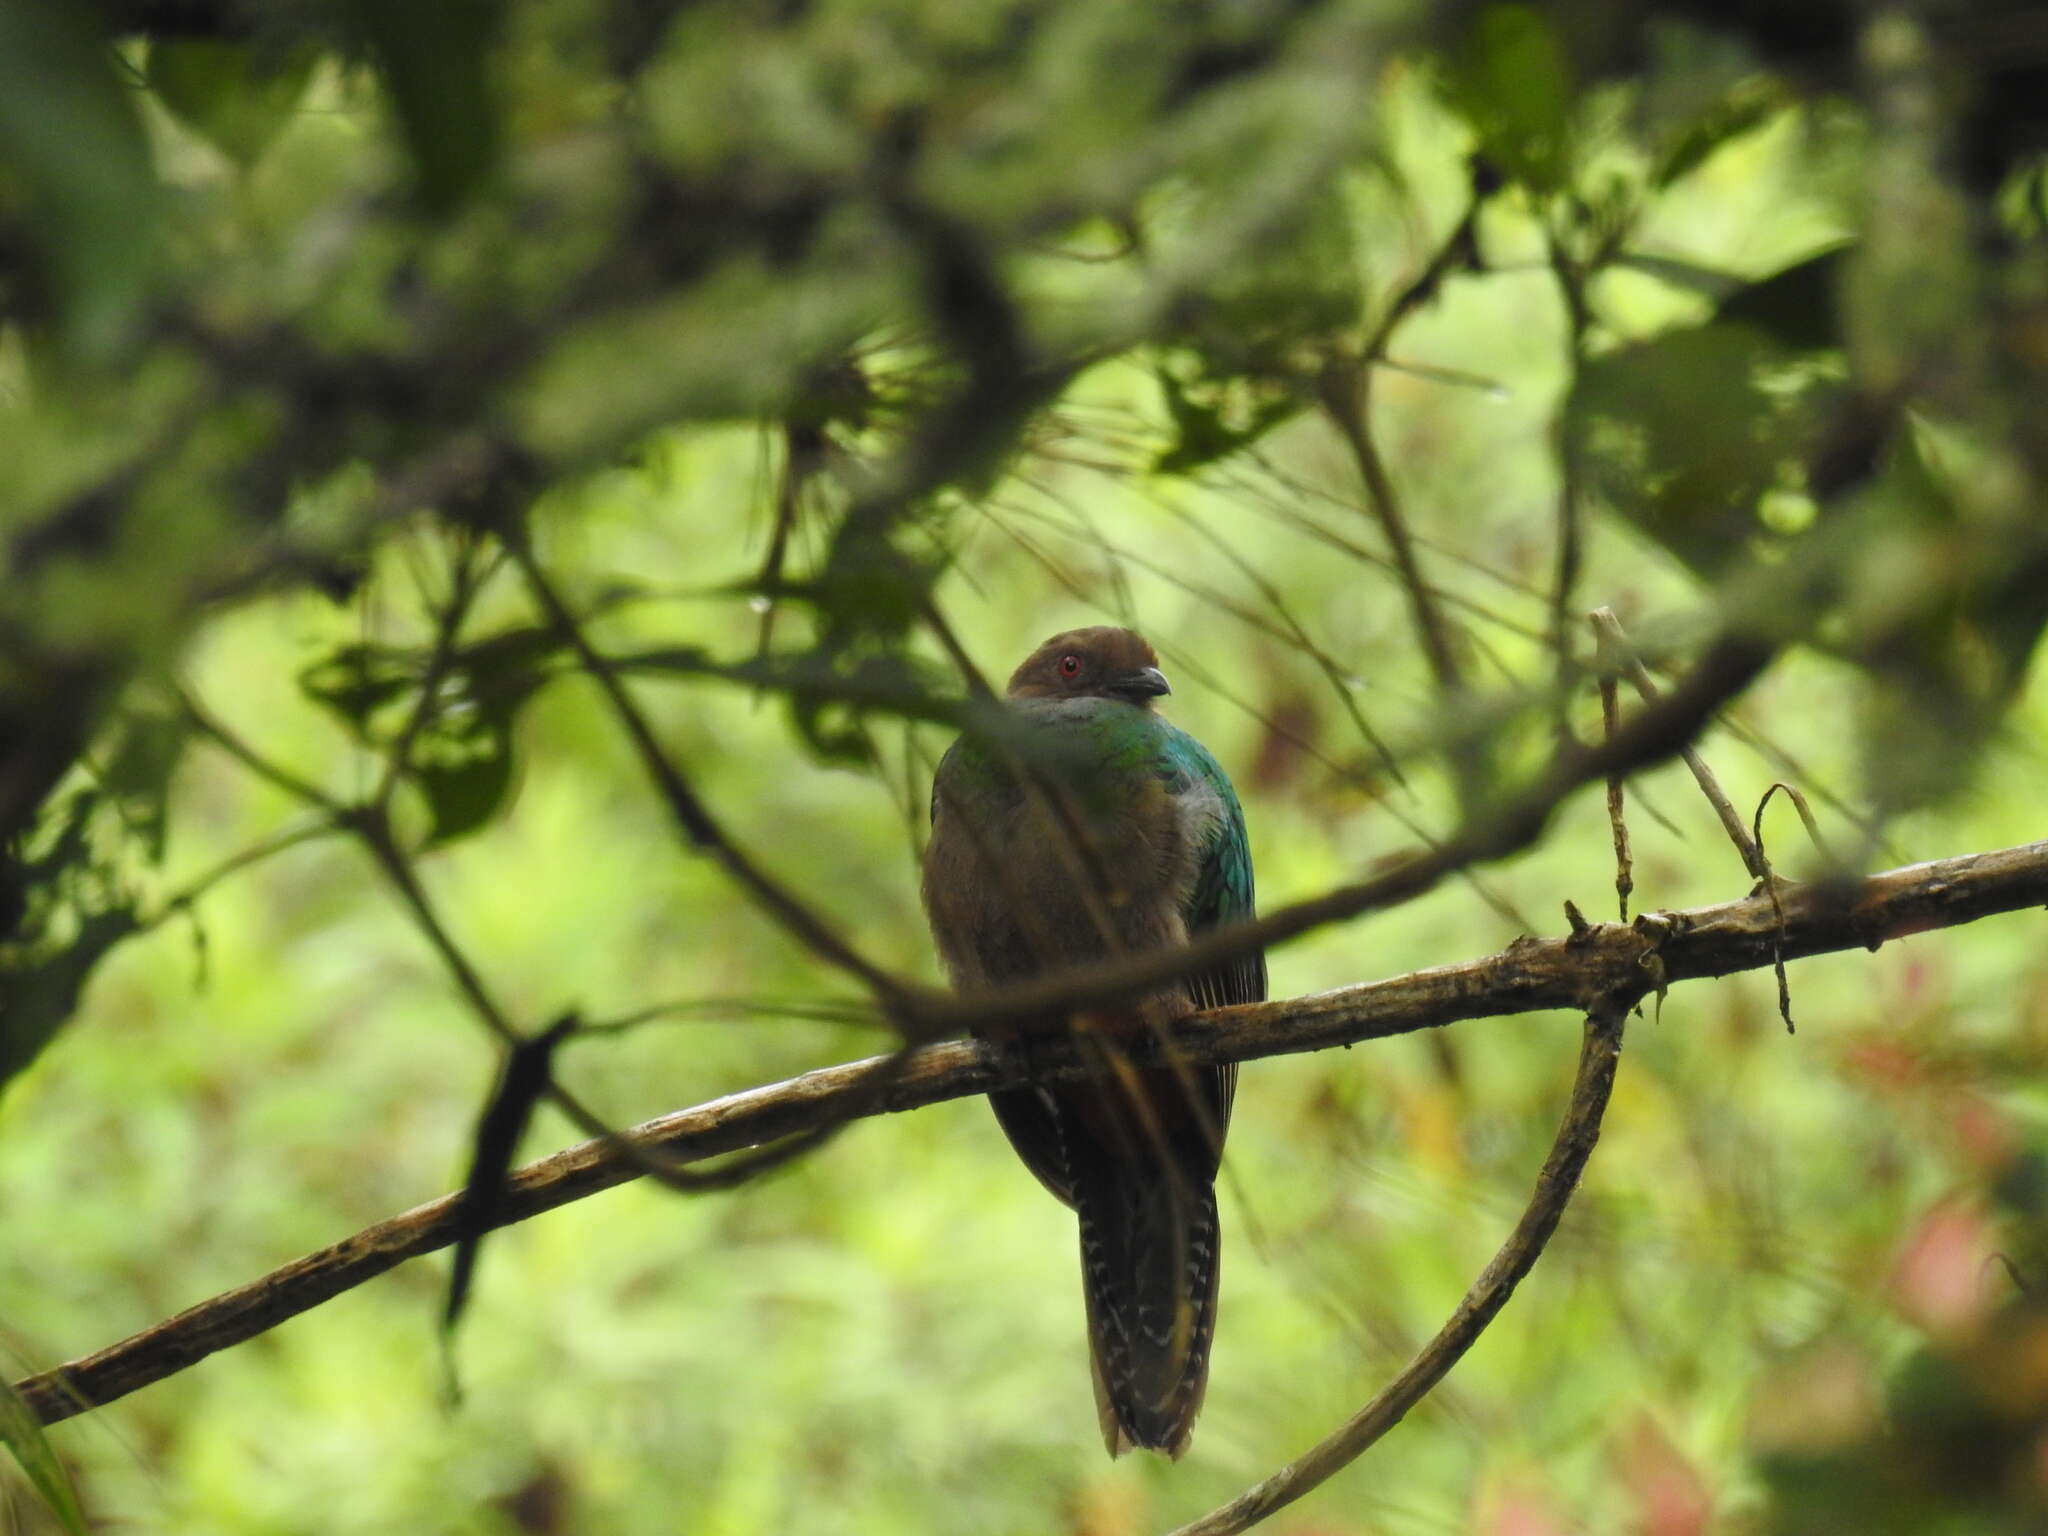 Image of Crested Quetzal